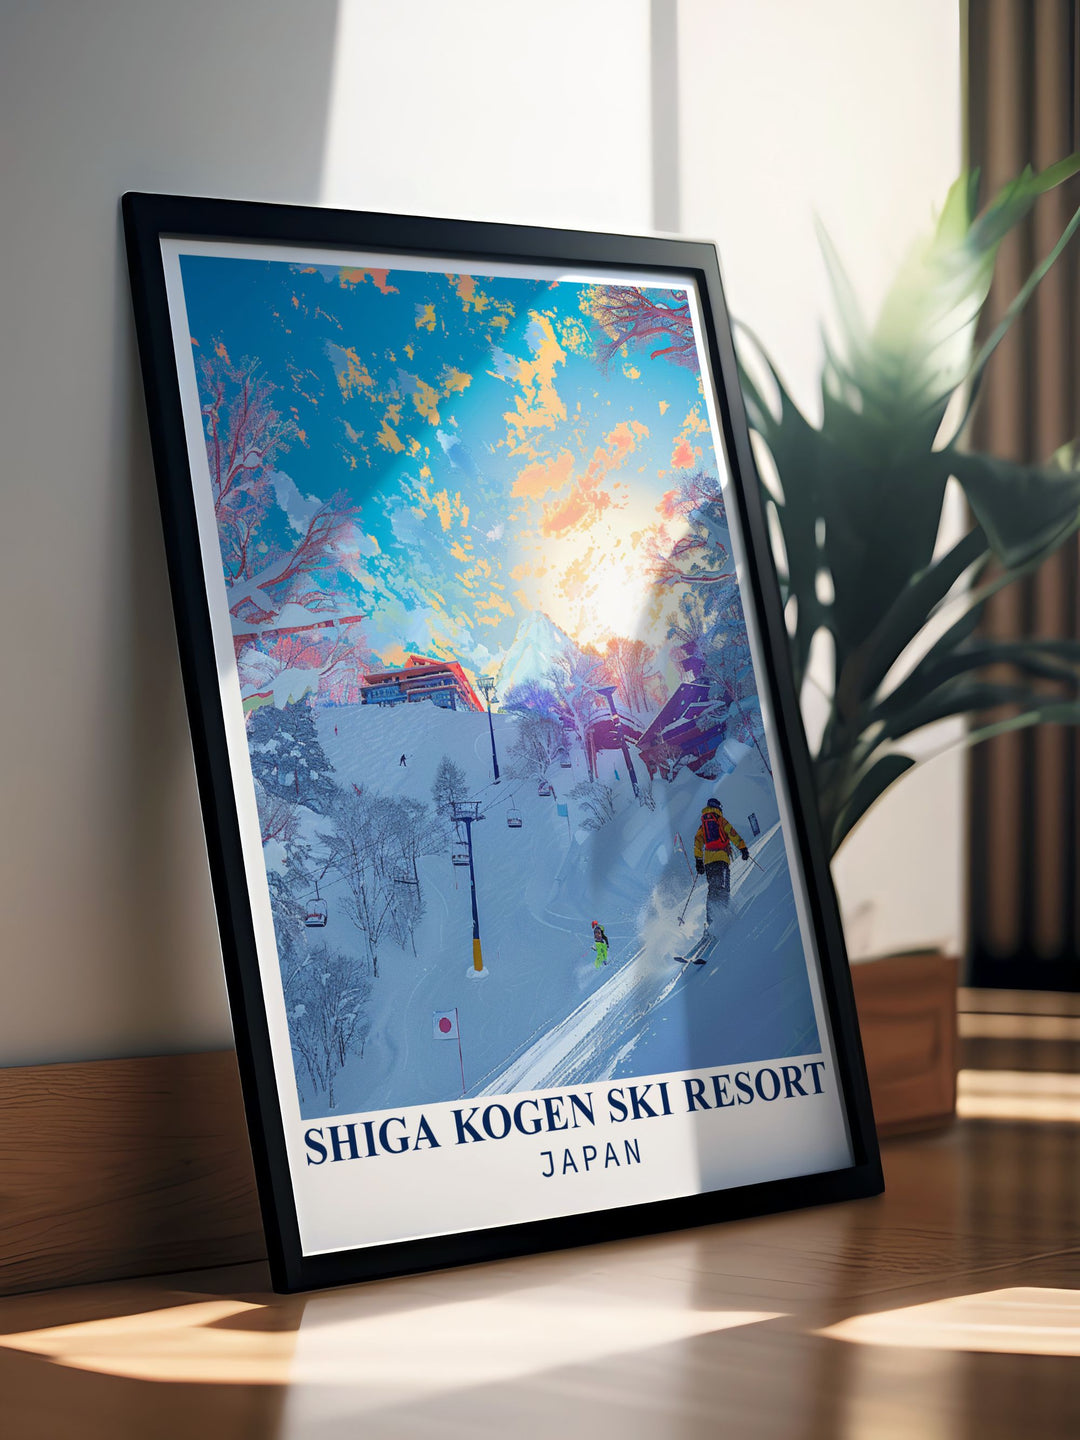 Shiga Kogen is illustrated in this poster, featuring the interconnected ski areas and fresh powder, inviting viewers to imagine the thrill of skiing in Japans largest ski resort.